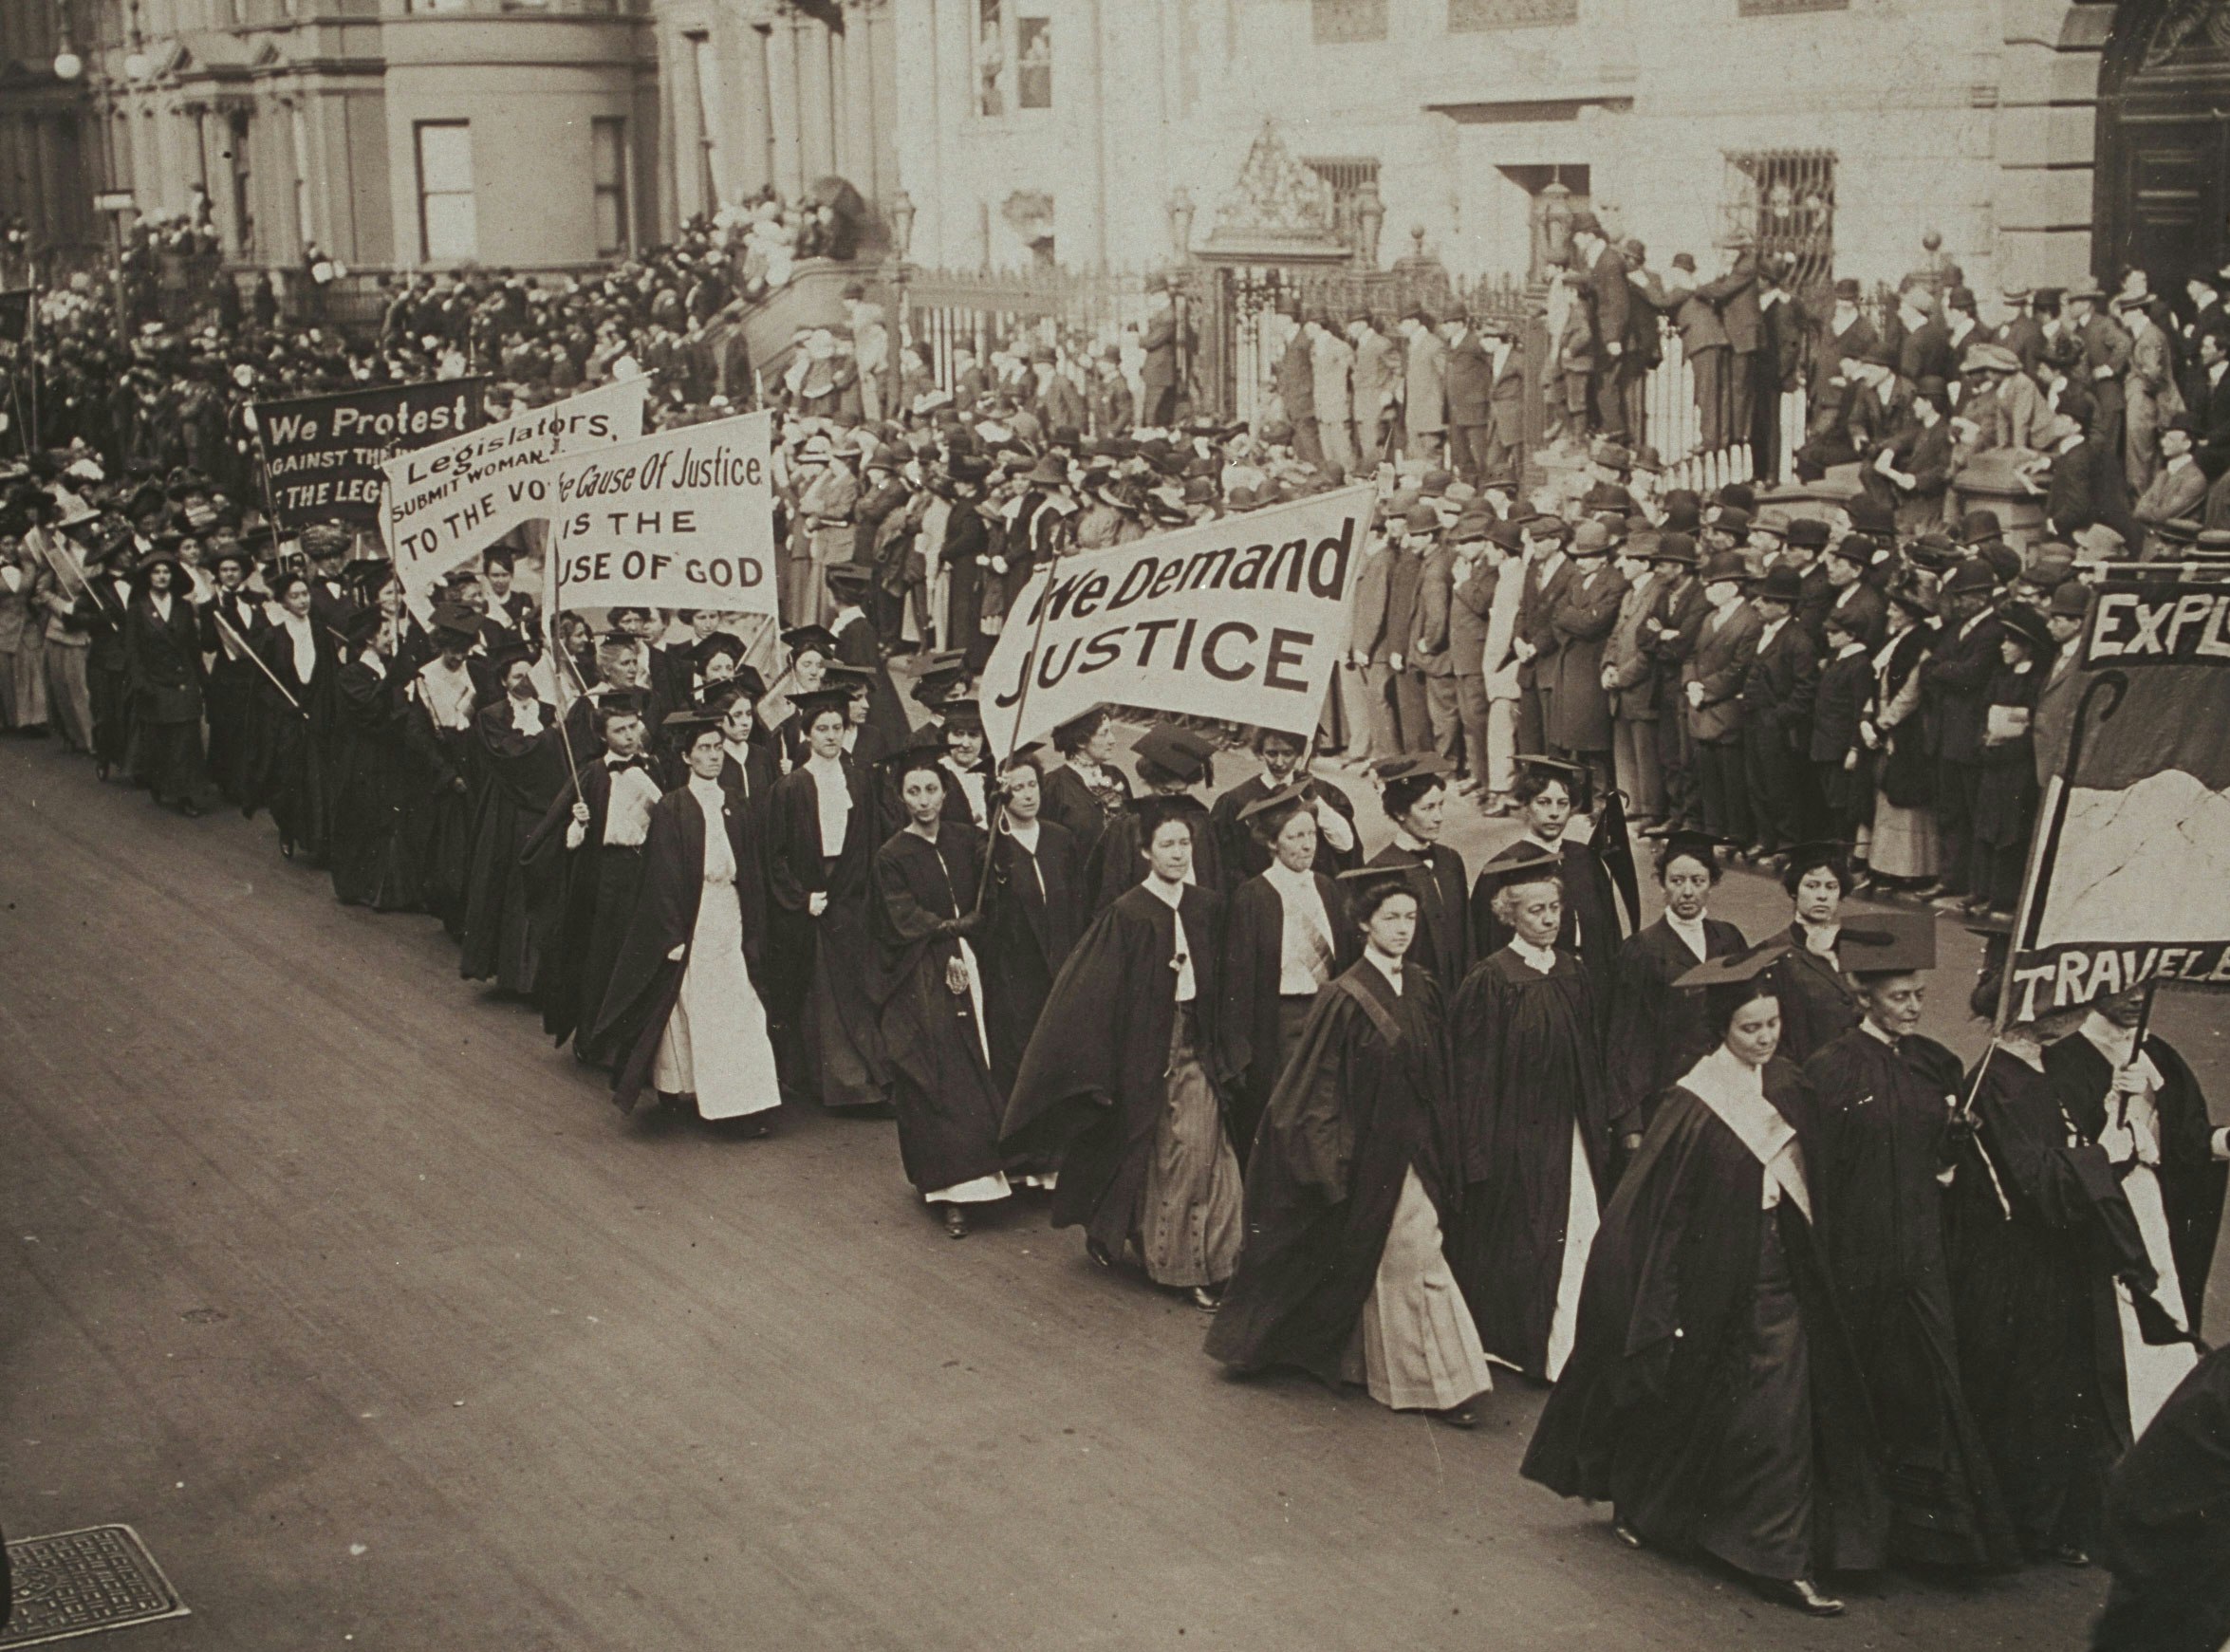 Women in academic dress march in a suffrage parade in New York City. They carry banners that read "We Demand Justice," "The Cause of Justice is the Cause of God," "Legislators, Submit Woman [cut off] To The Vote."